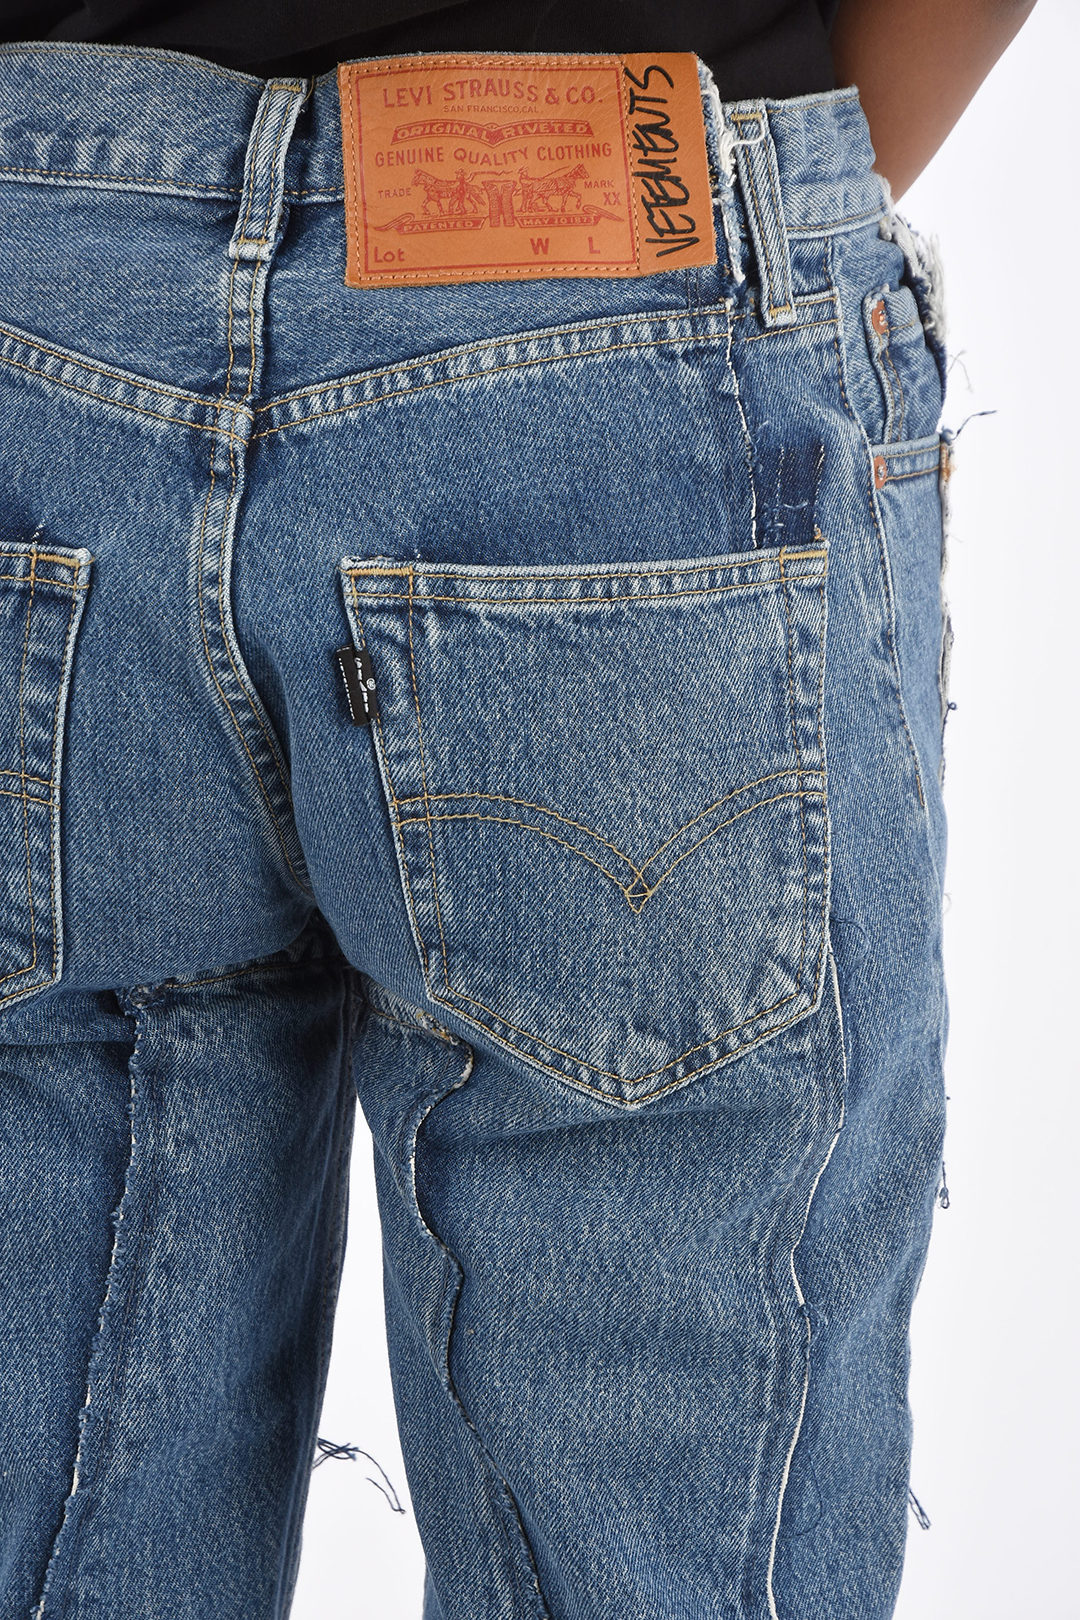 Vetements LEVI'S Frayed High Waist Jeans women - Glamood Outlet